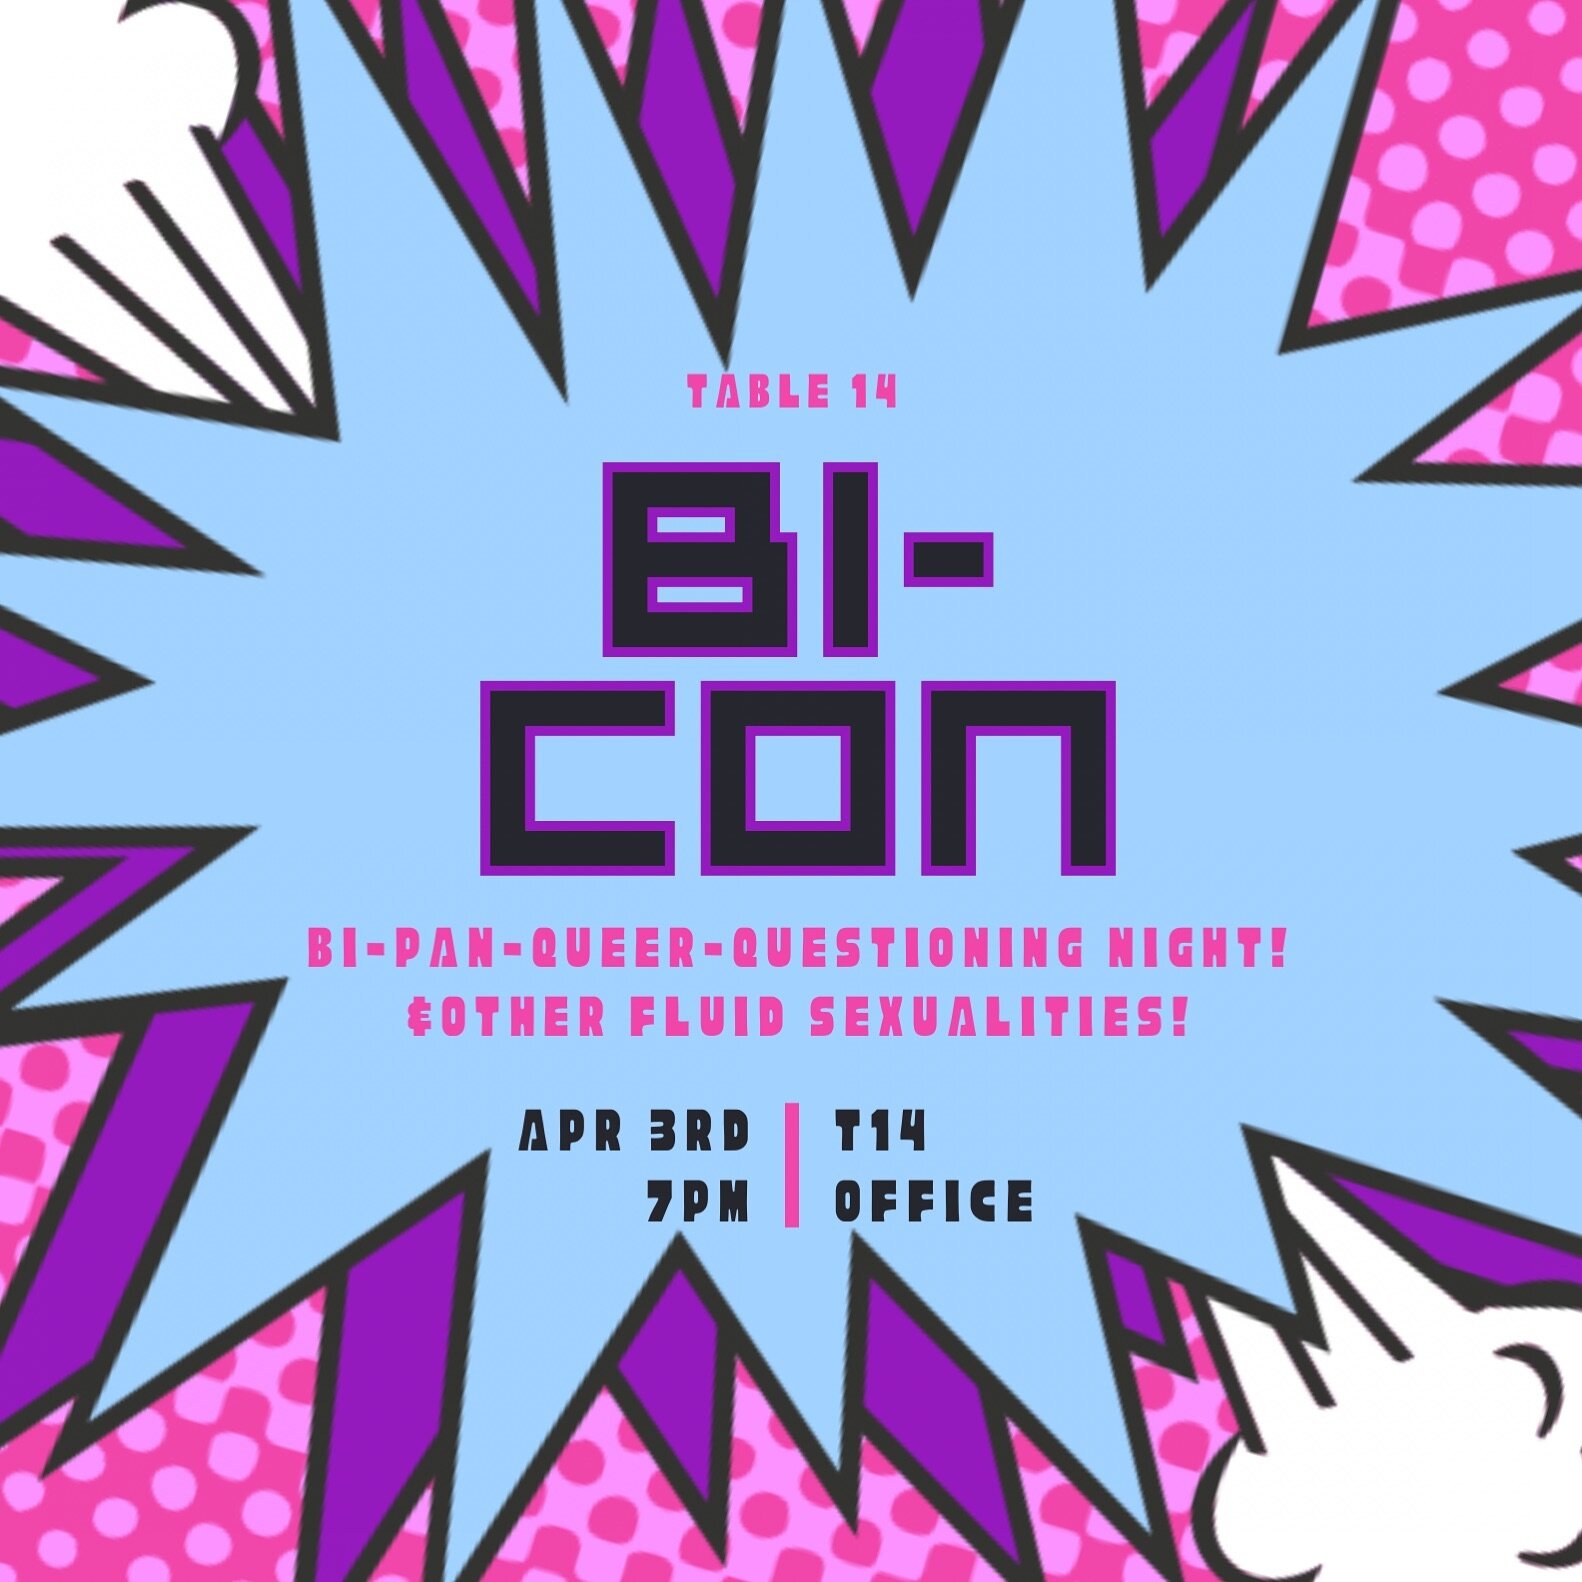 Hi all! Hope your Spring break is restful! Our first event back is BI-CON! A special night for people who are Bi, Pan, Queer, Questioning, or another fluid sexuality. Also for those who have someone close to them who is and wants to show support for 